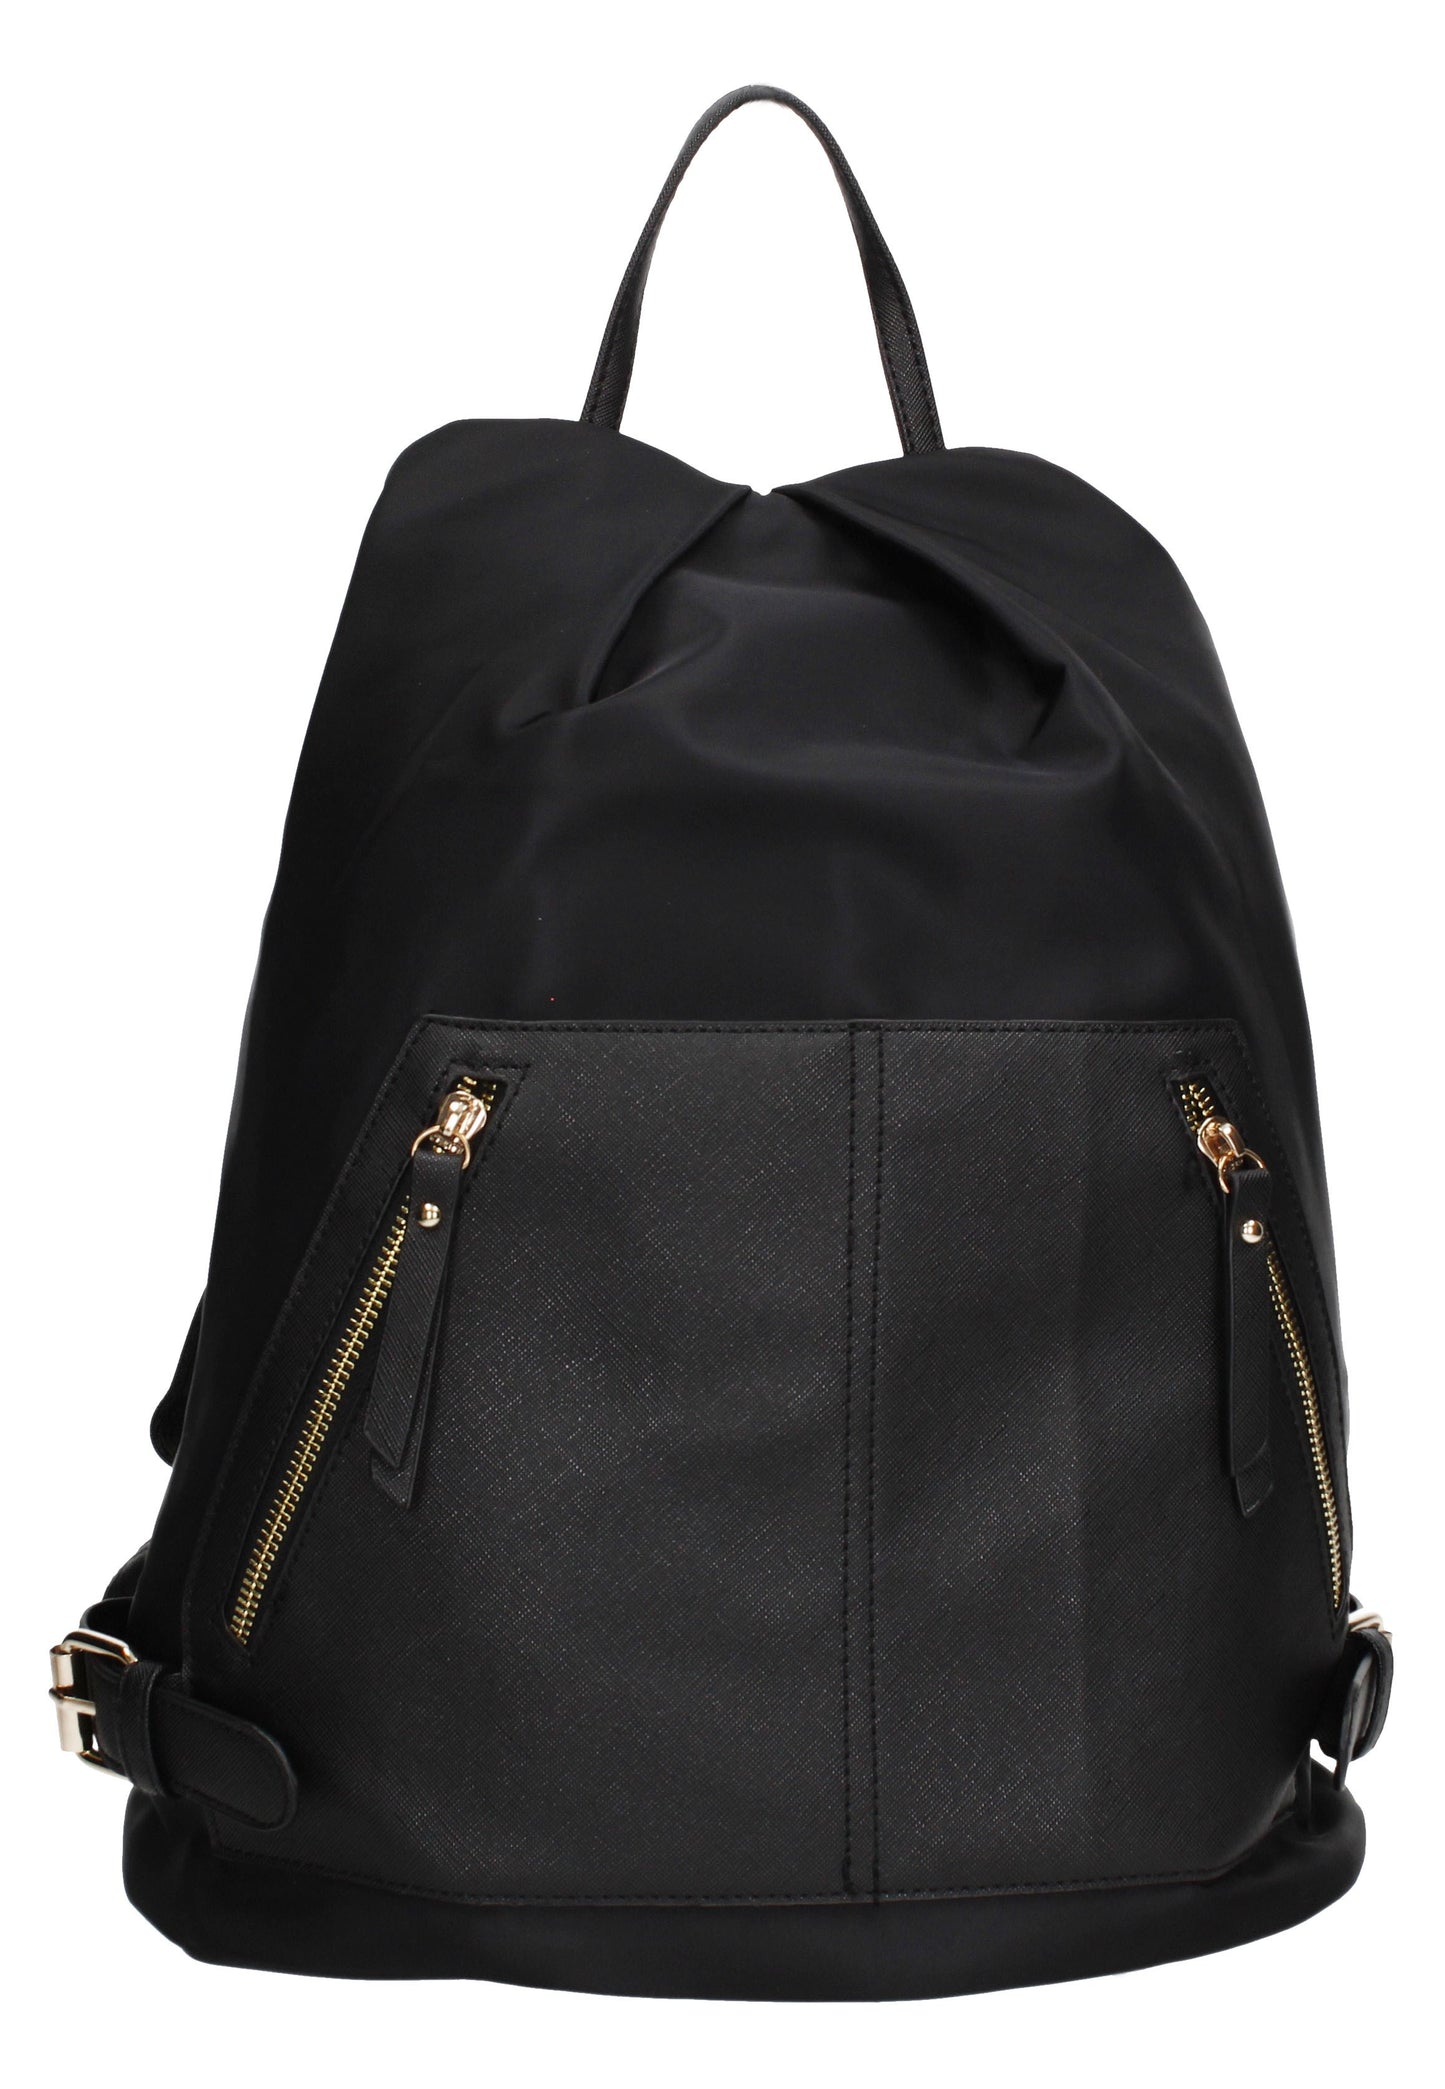 Swanky Swans Jesse Backpack Black Perfect Backpack for school!